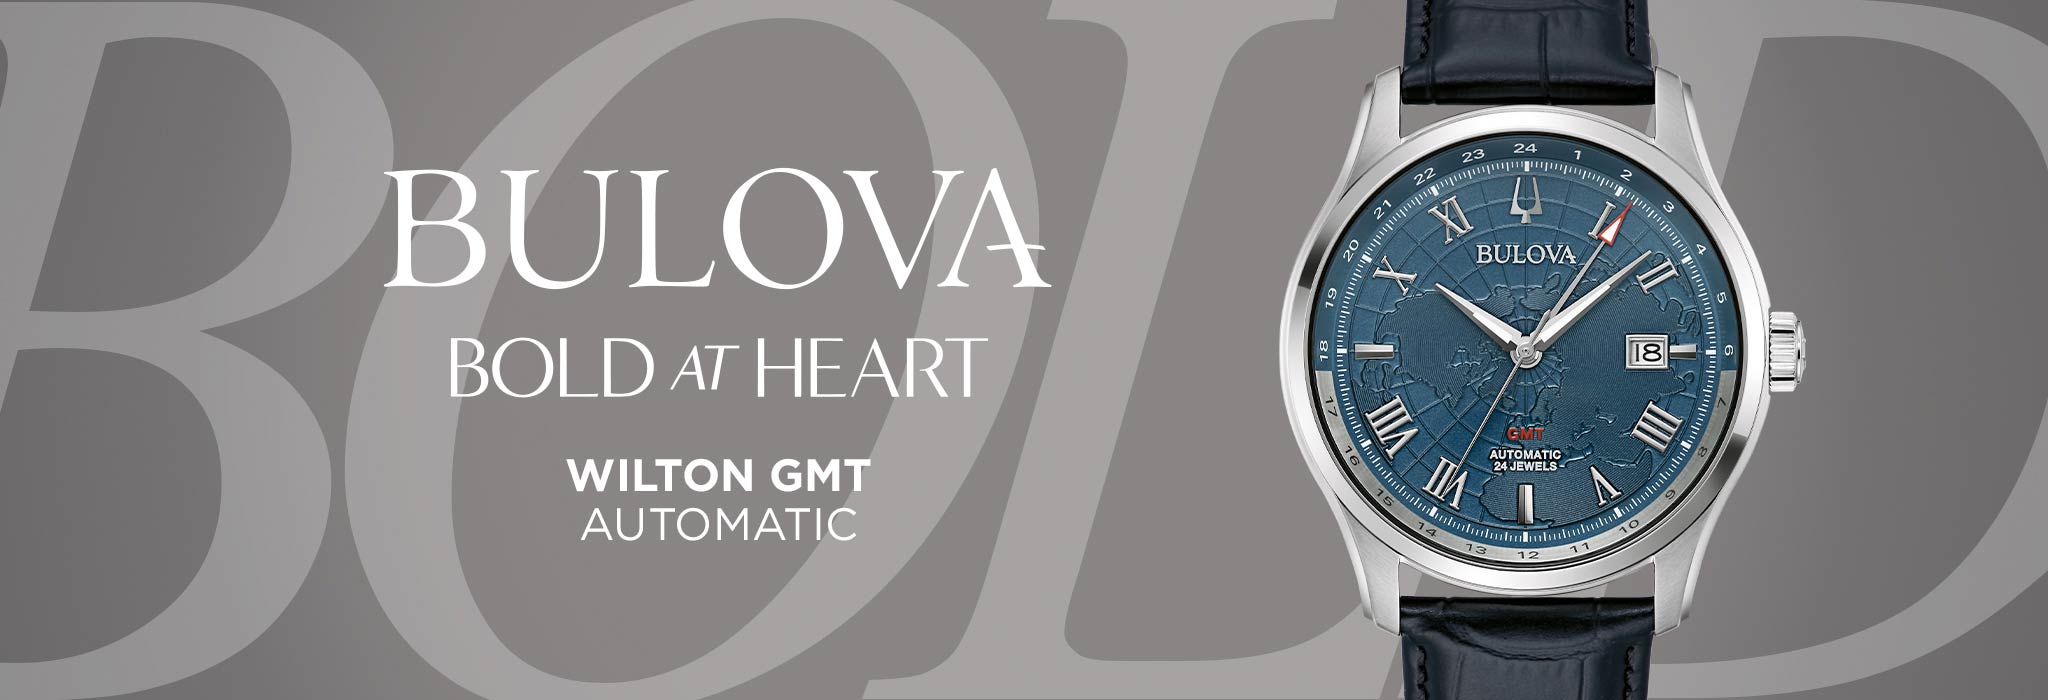 Bulova - A History of Firsts